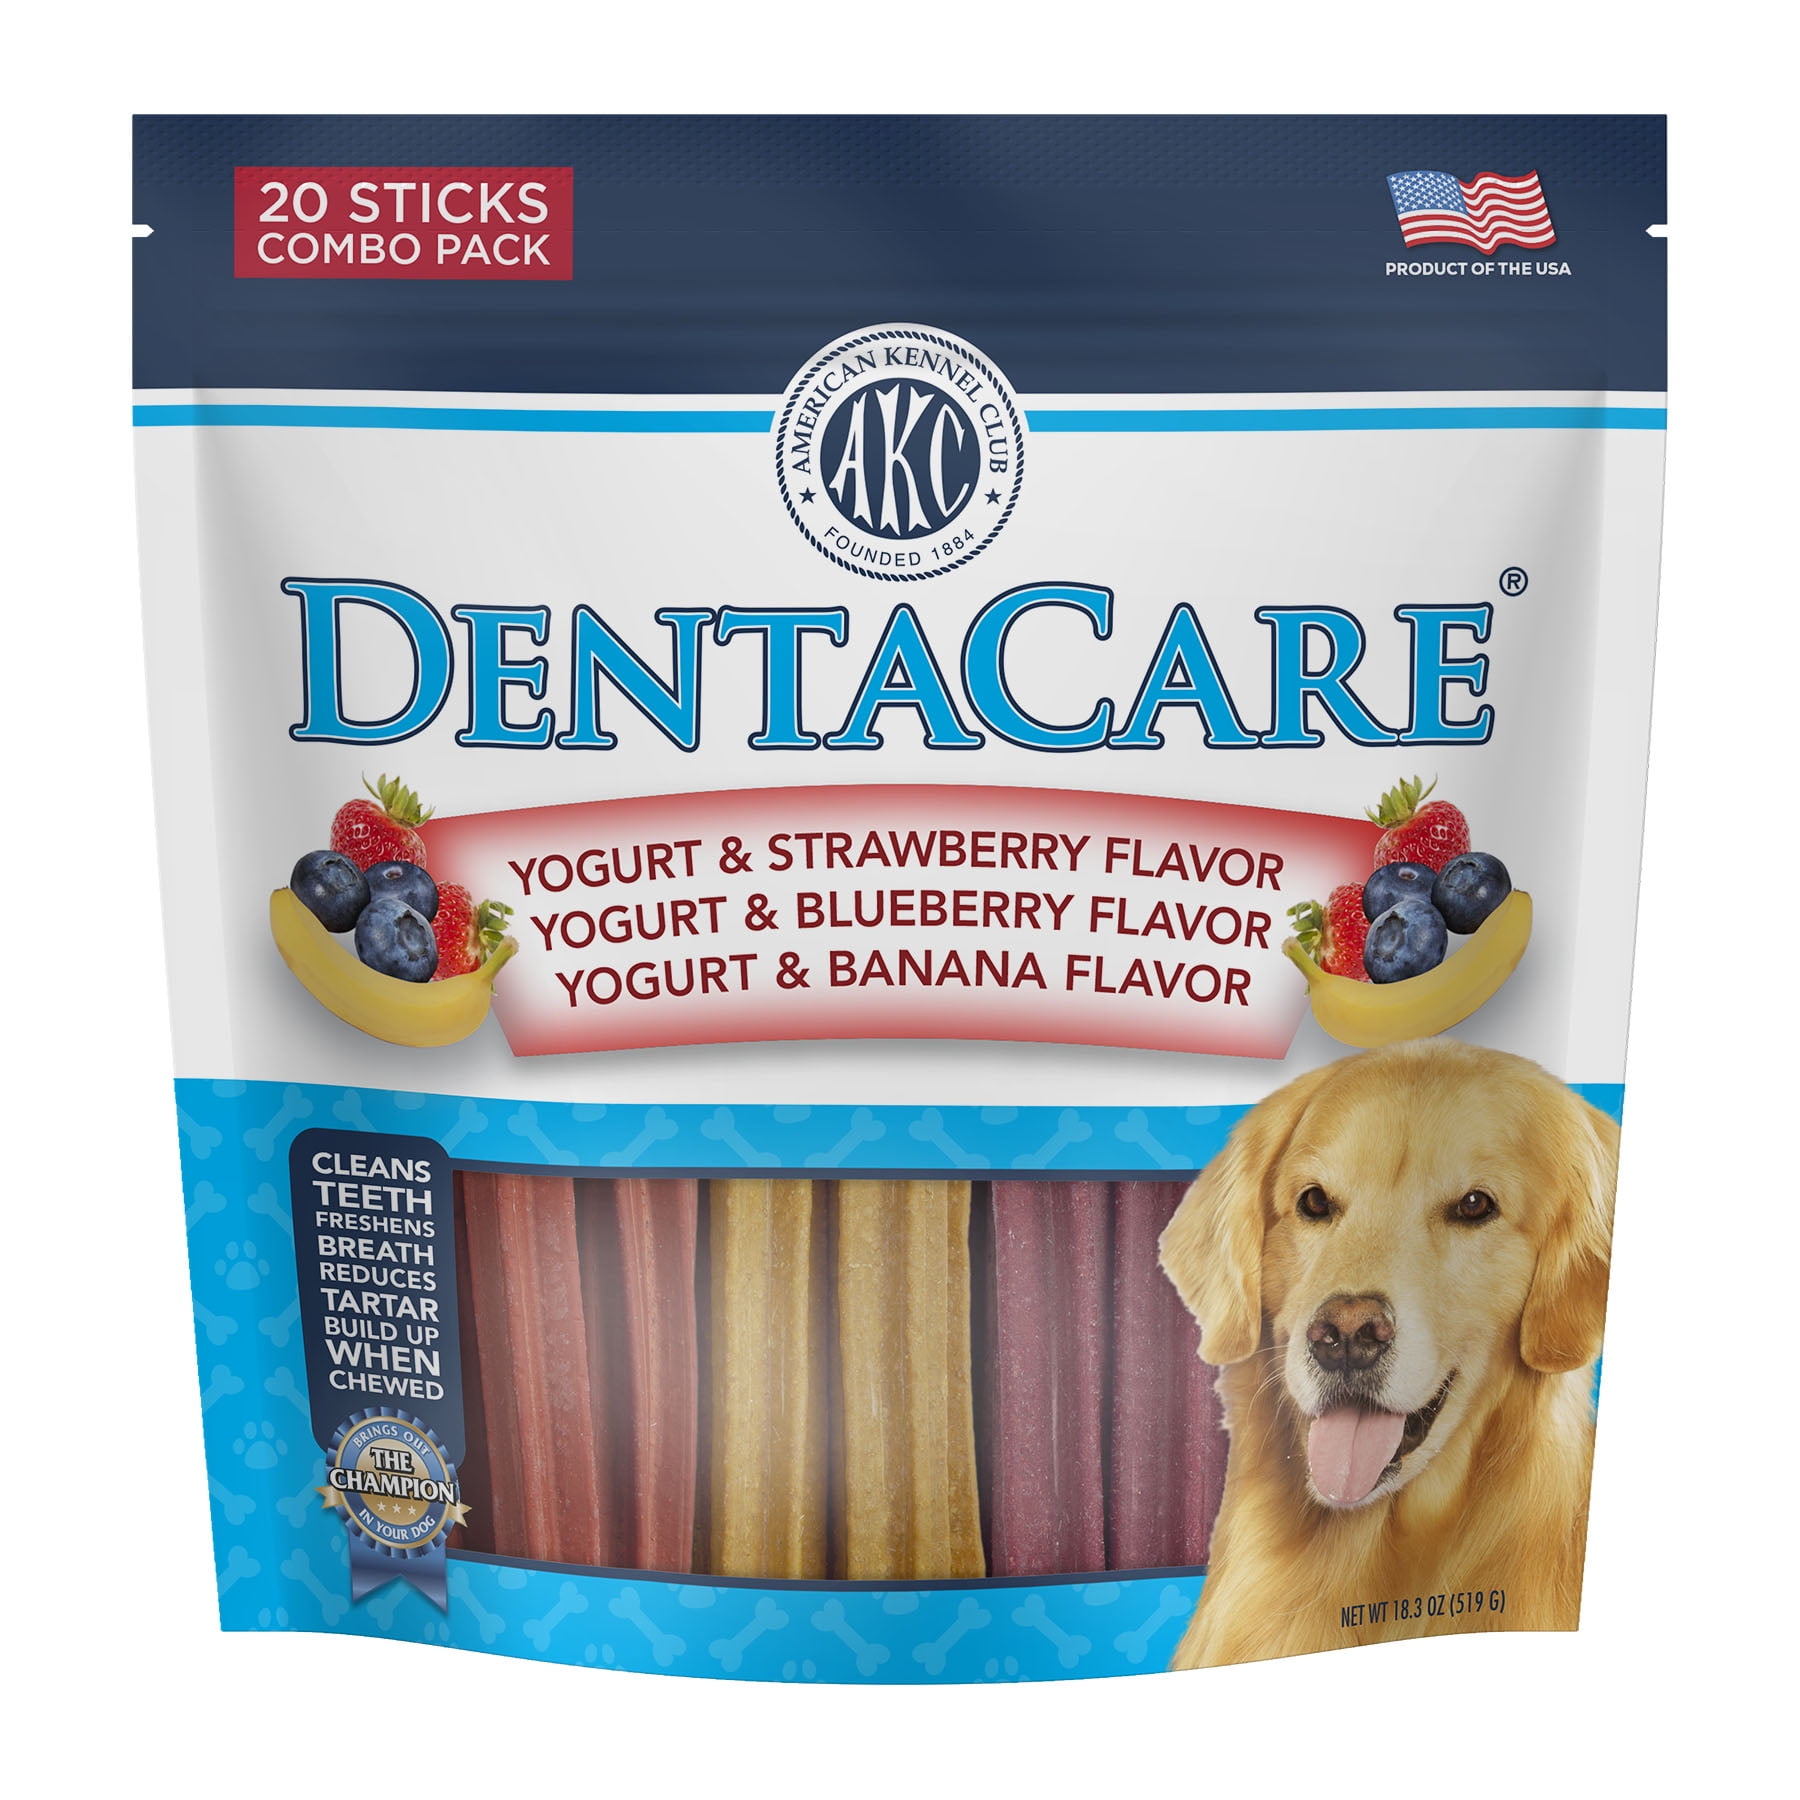 American Kennel Club DentaCare Dental Sticks for Dogs Combo Pack, 20 count,   oz 